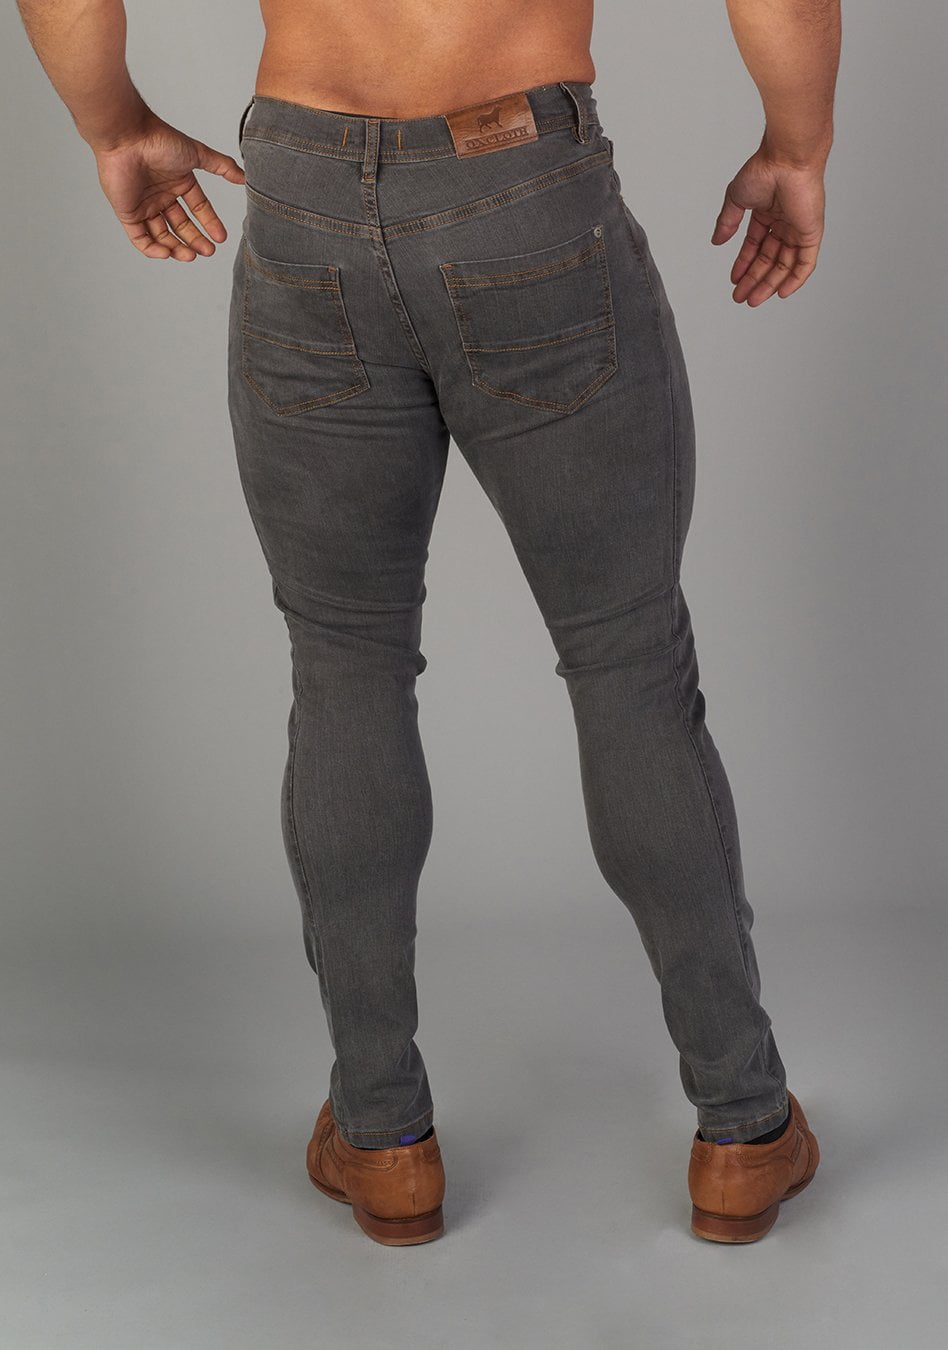 Rhino Athletic Fit Stretch Jeans - Oxcloth